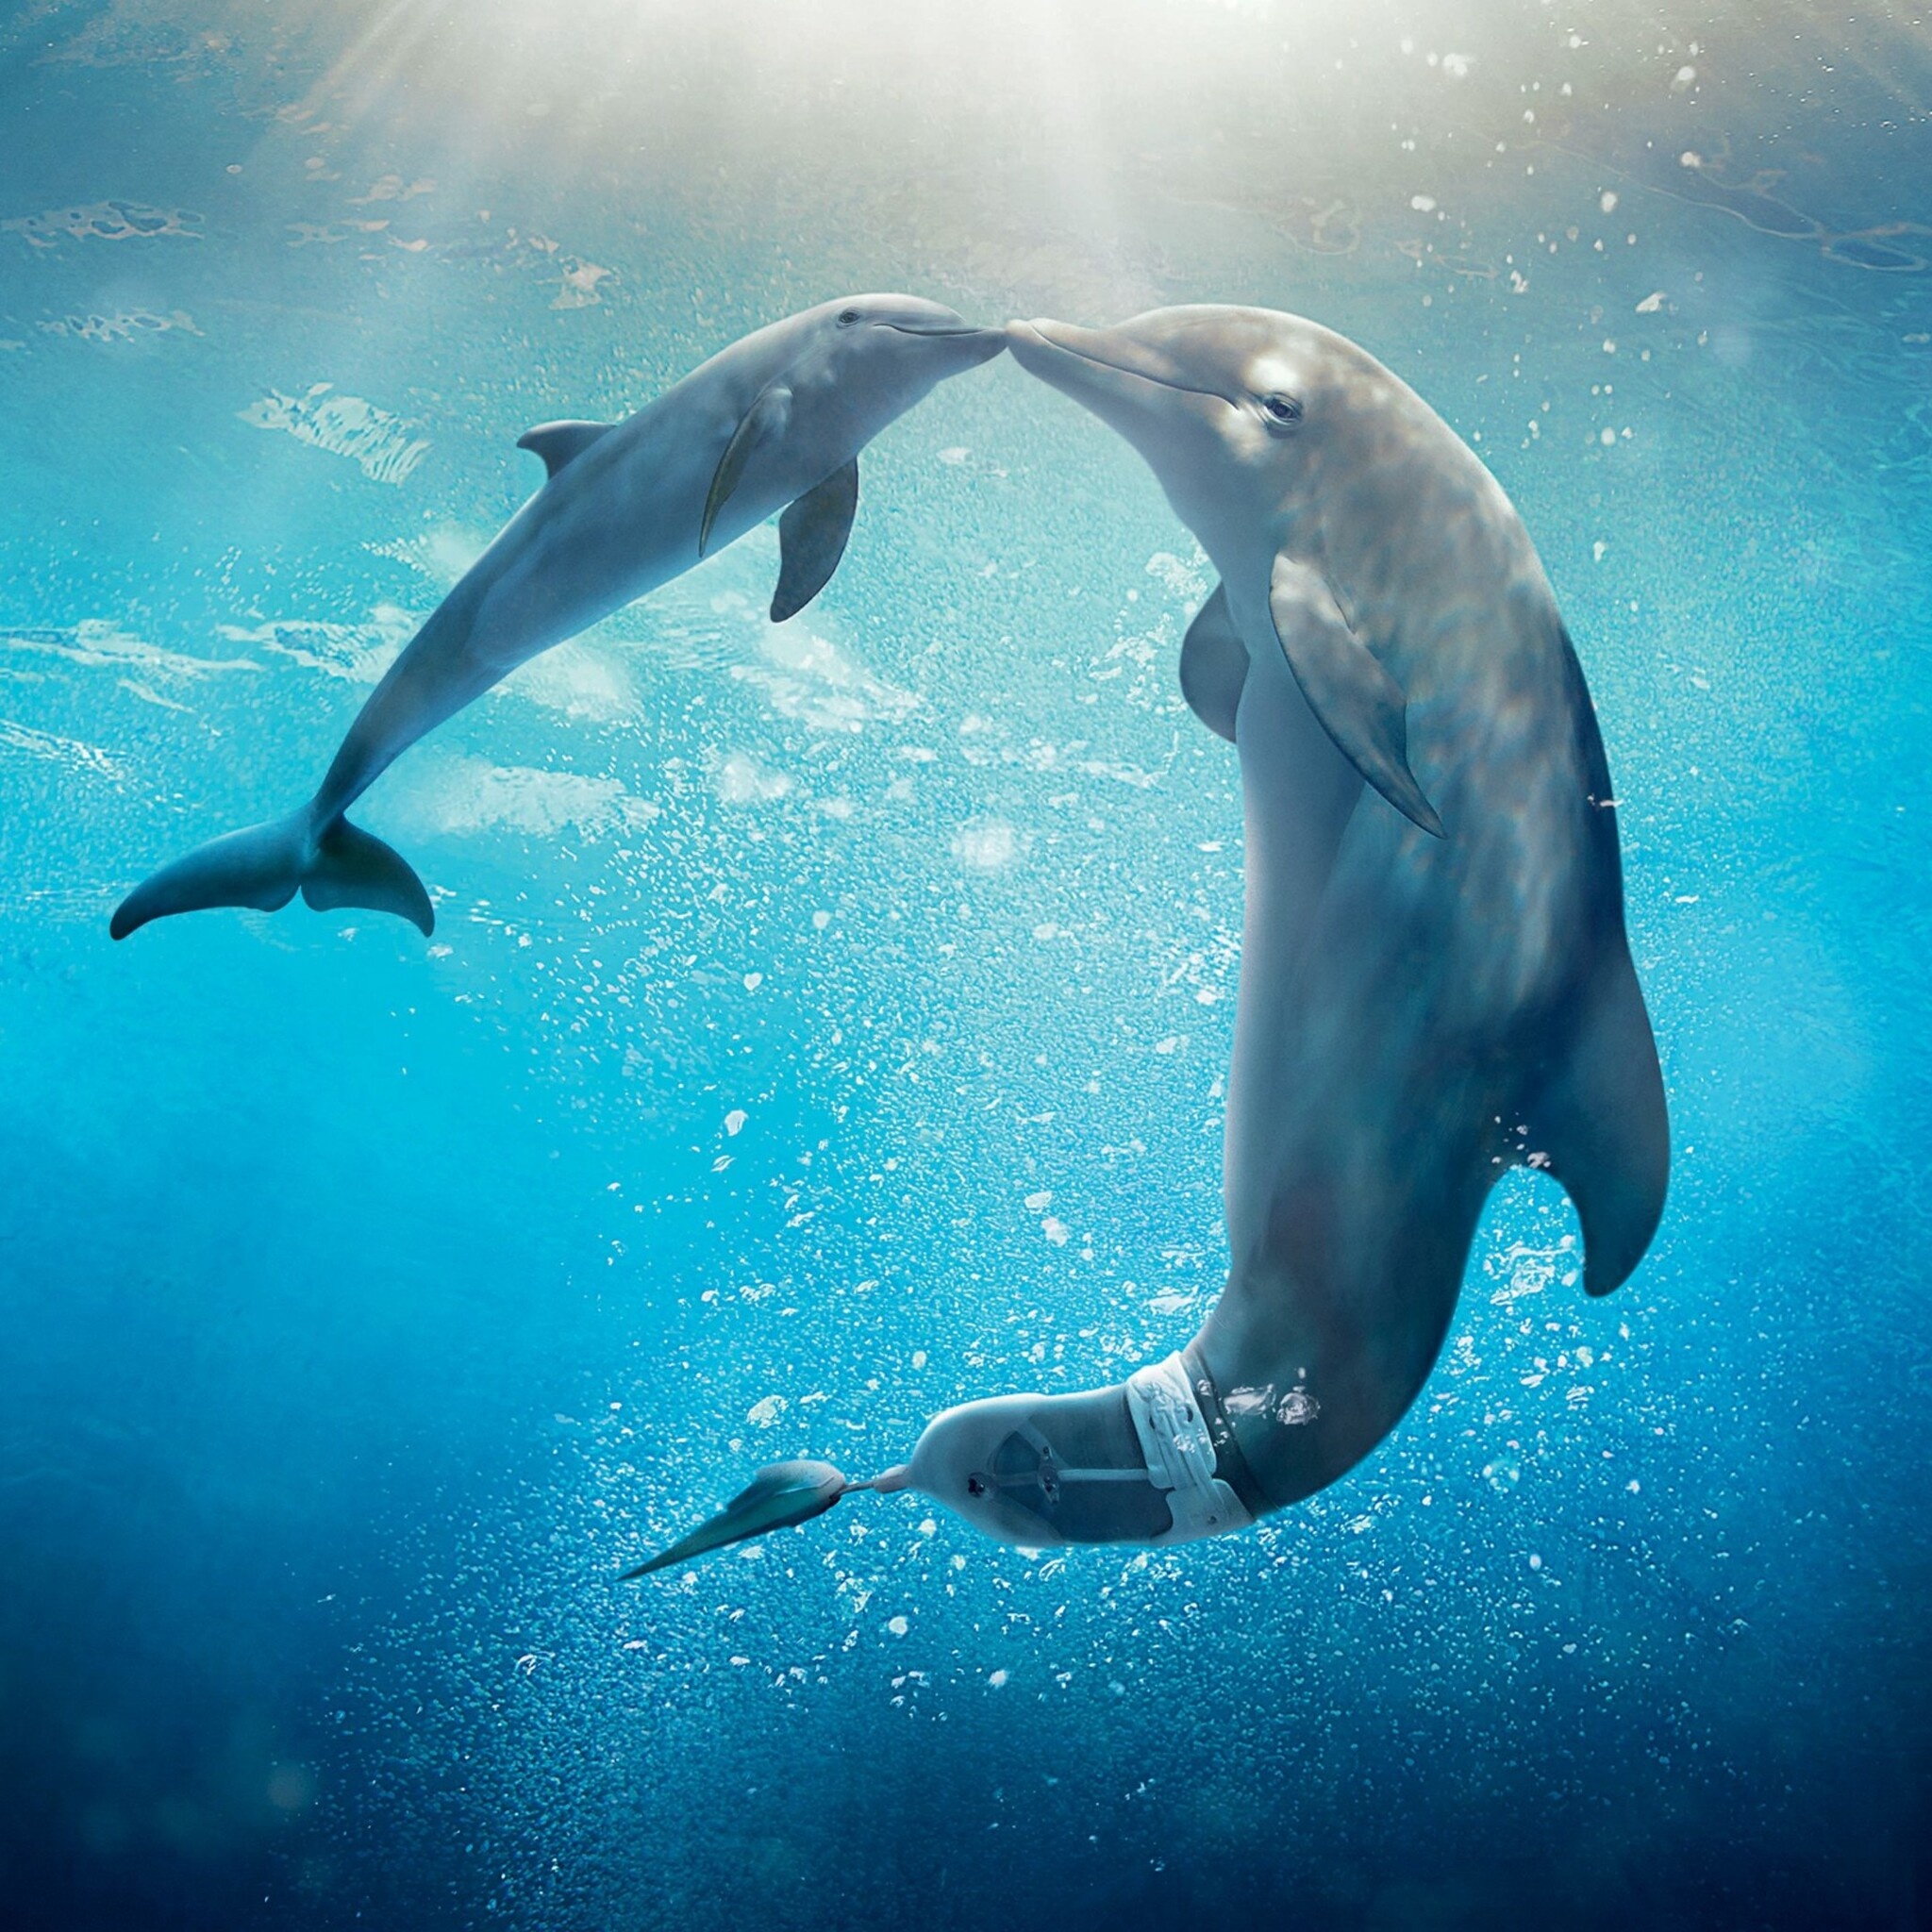 Dolphin Tale 2 movie wallpapers, Aquatic adventures, Heartwarming family films, Dolphin tale sequel, 2050x2050 HD Phone